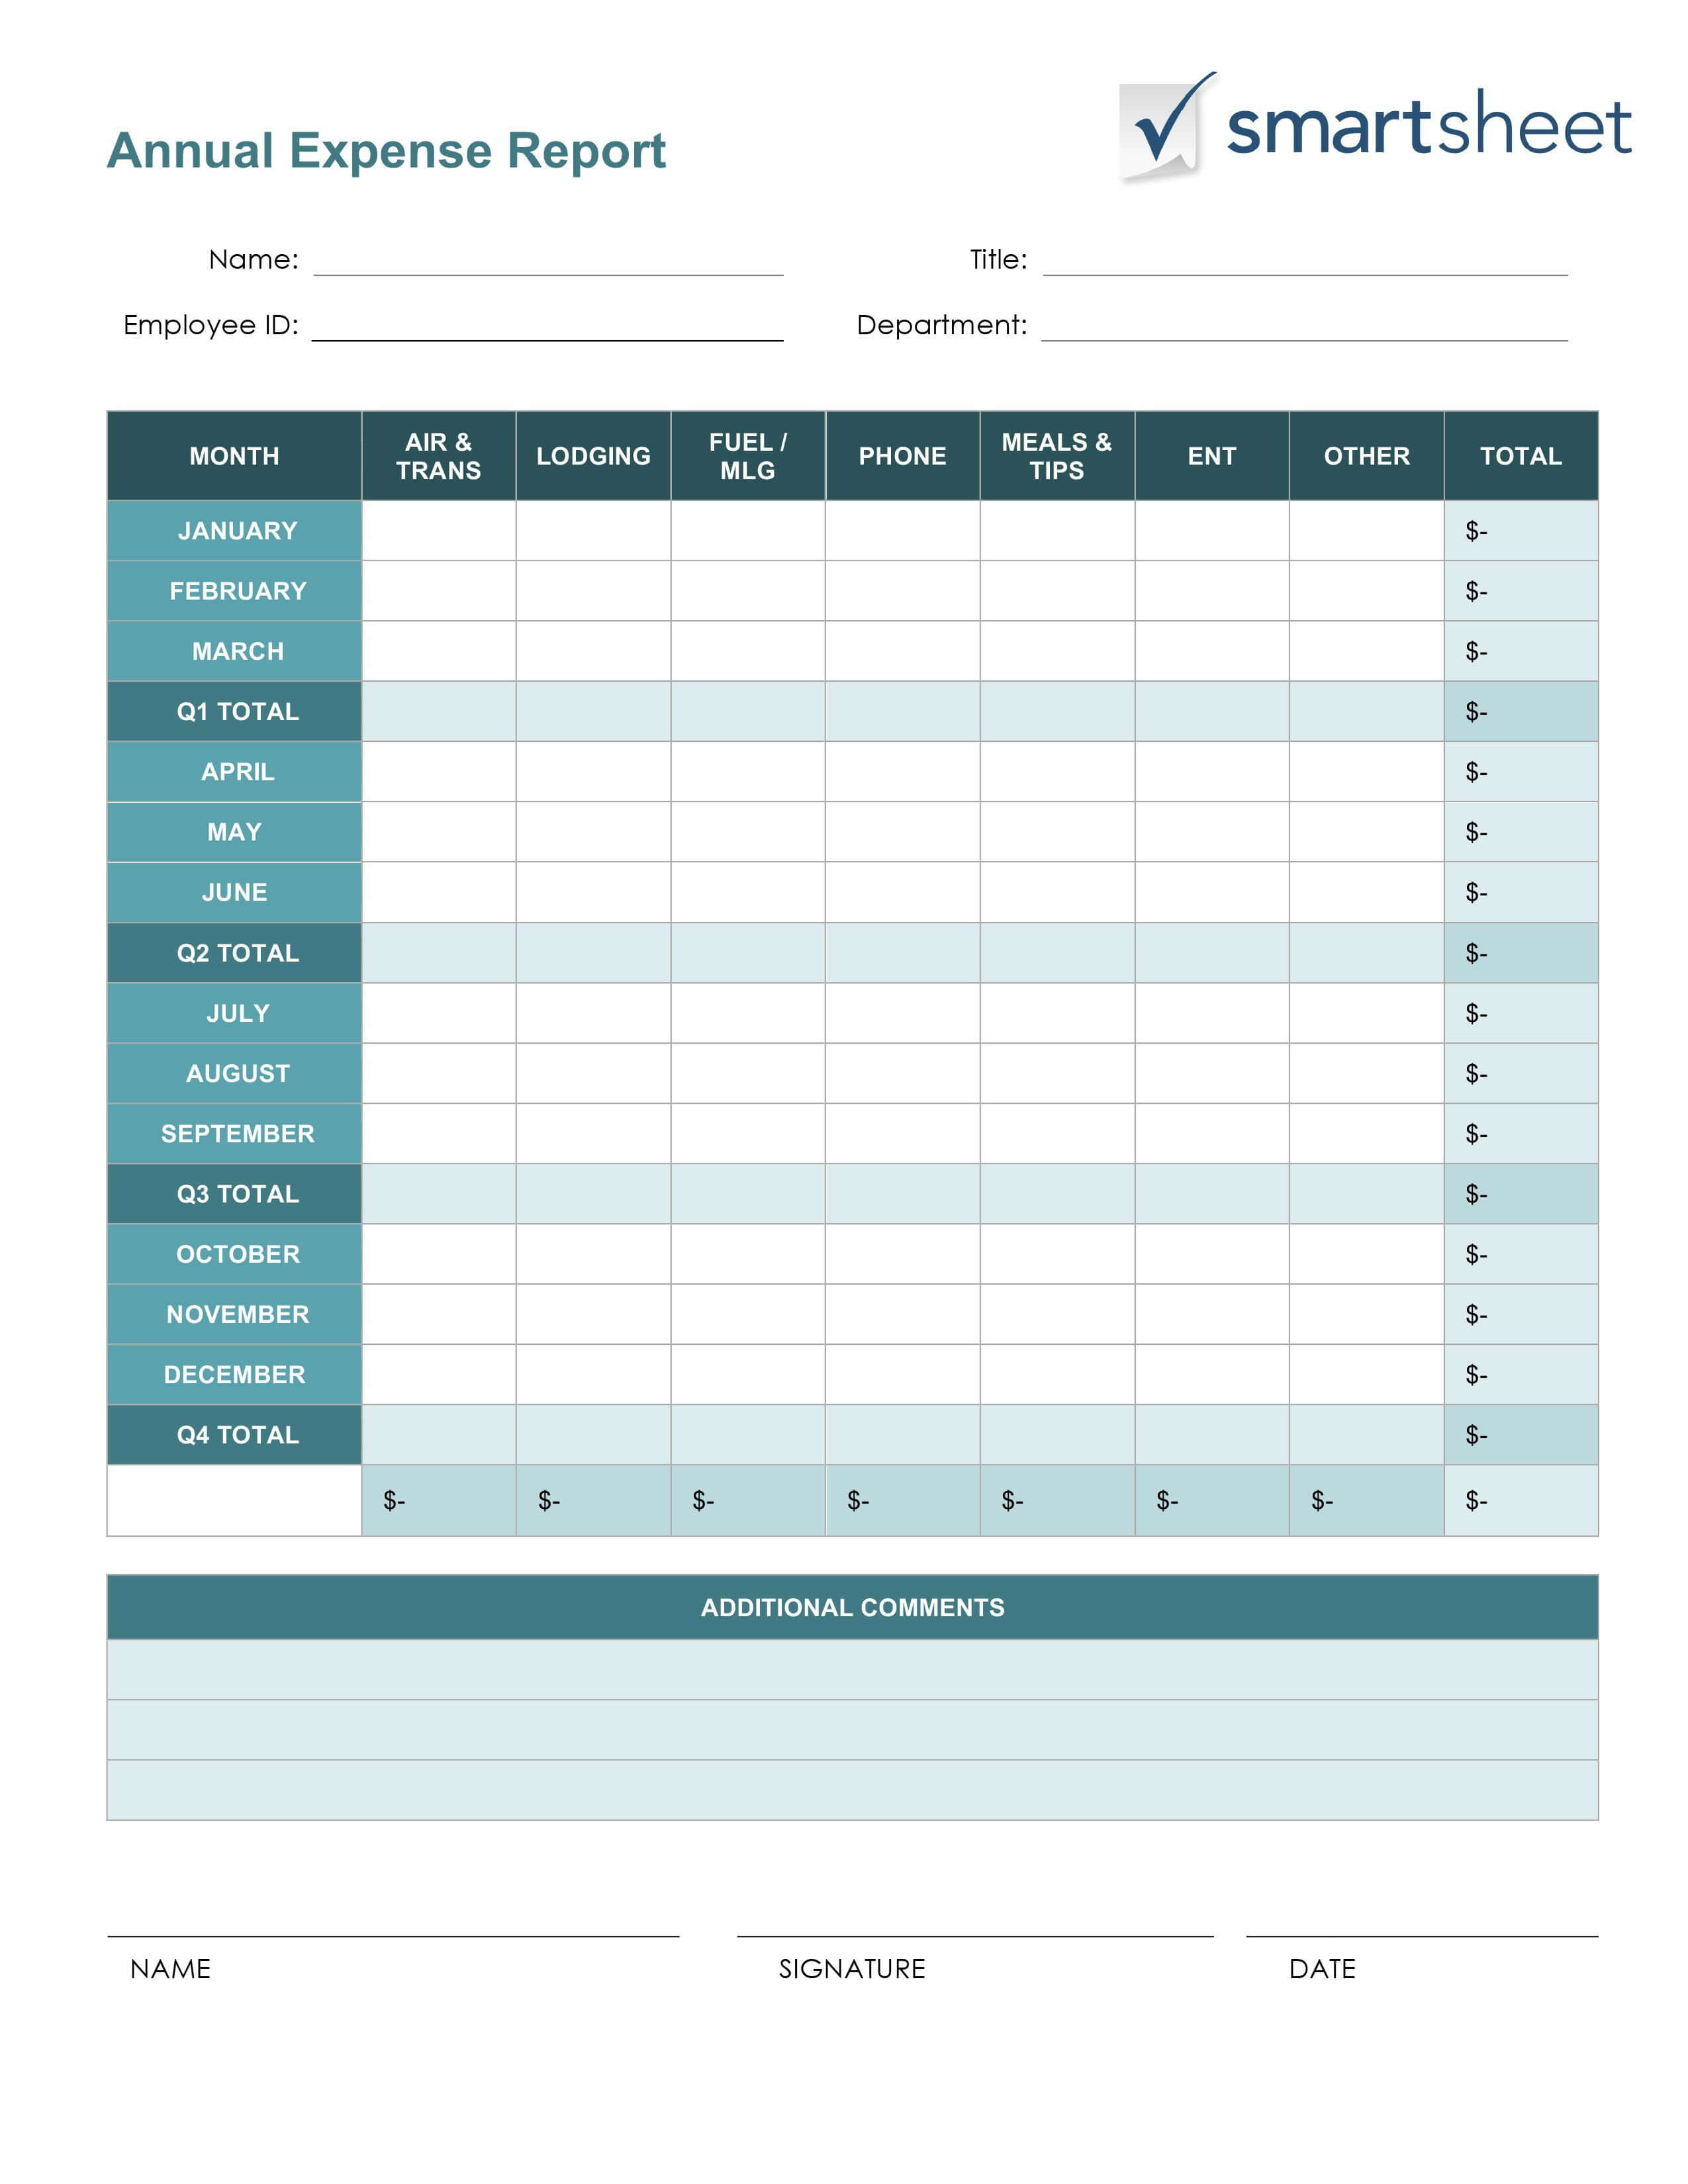 002 Monthly Expense Report Template Ideas Fantastic Format Inside Quarterly Expense Report Template